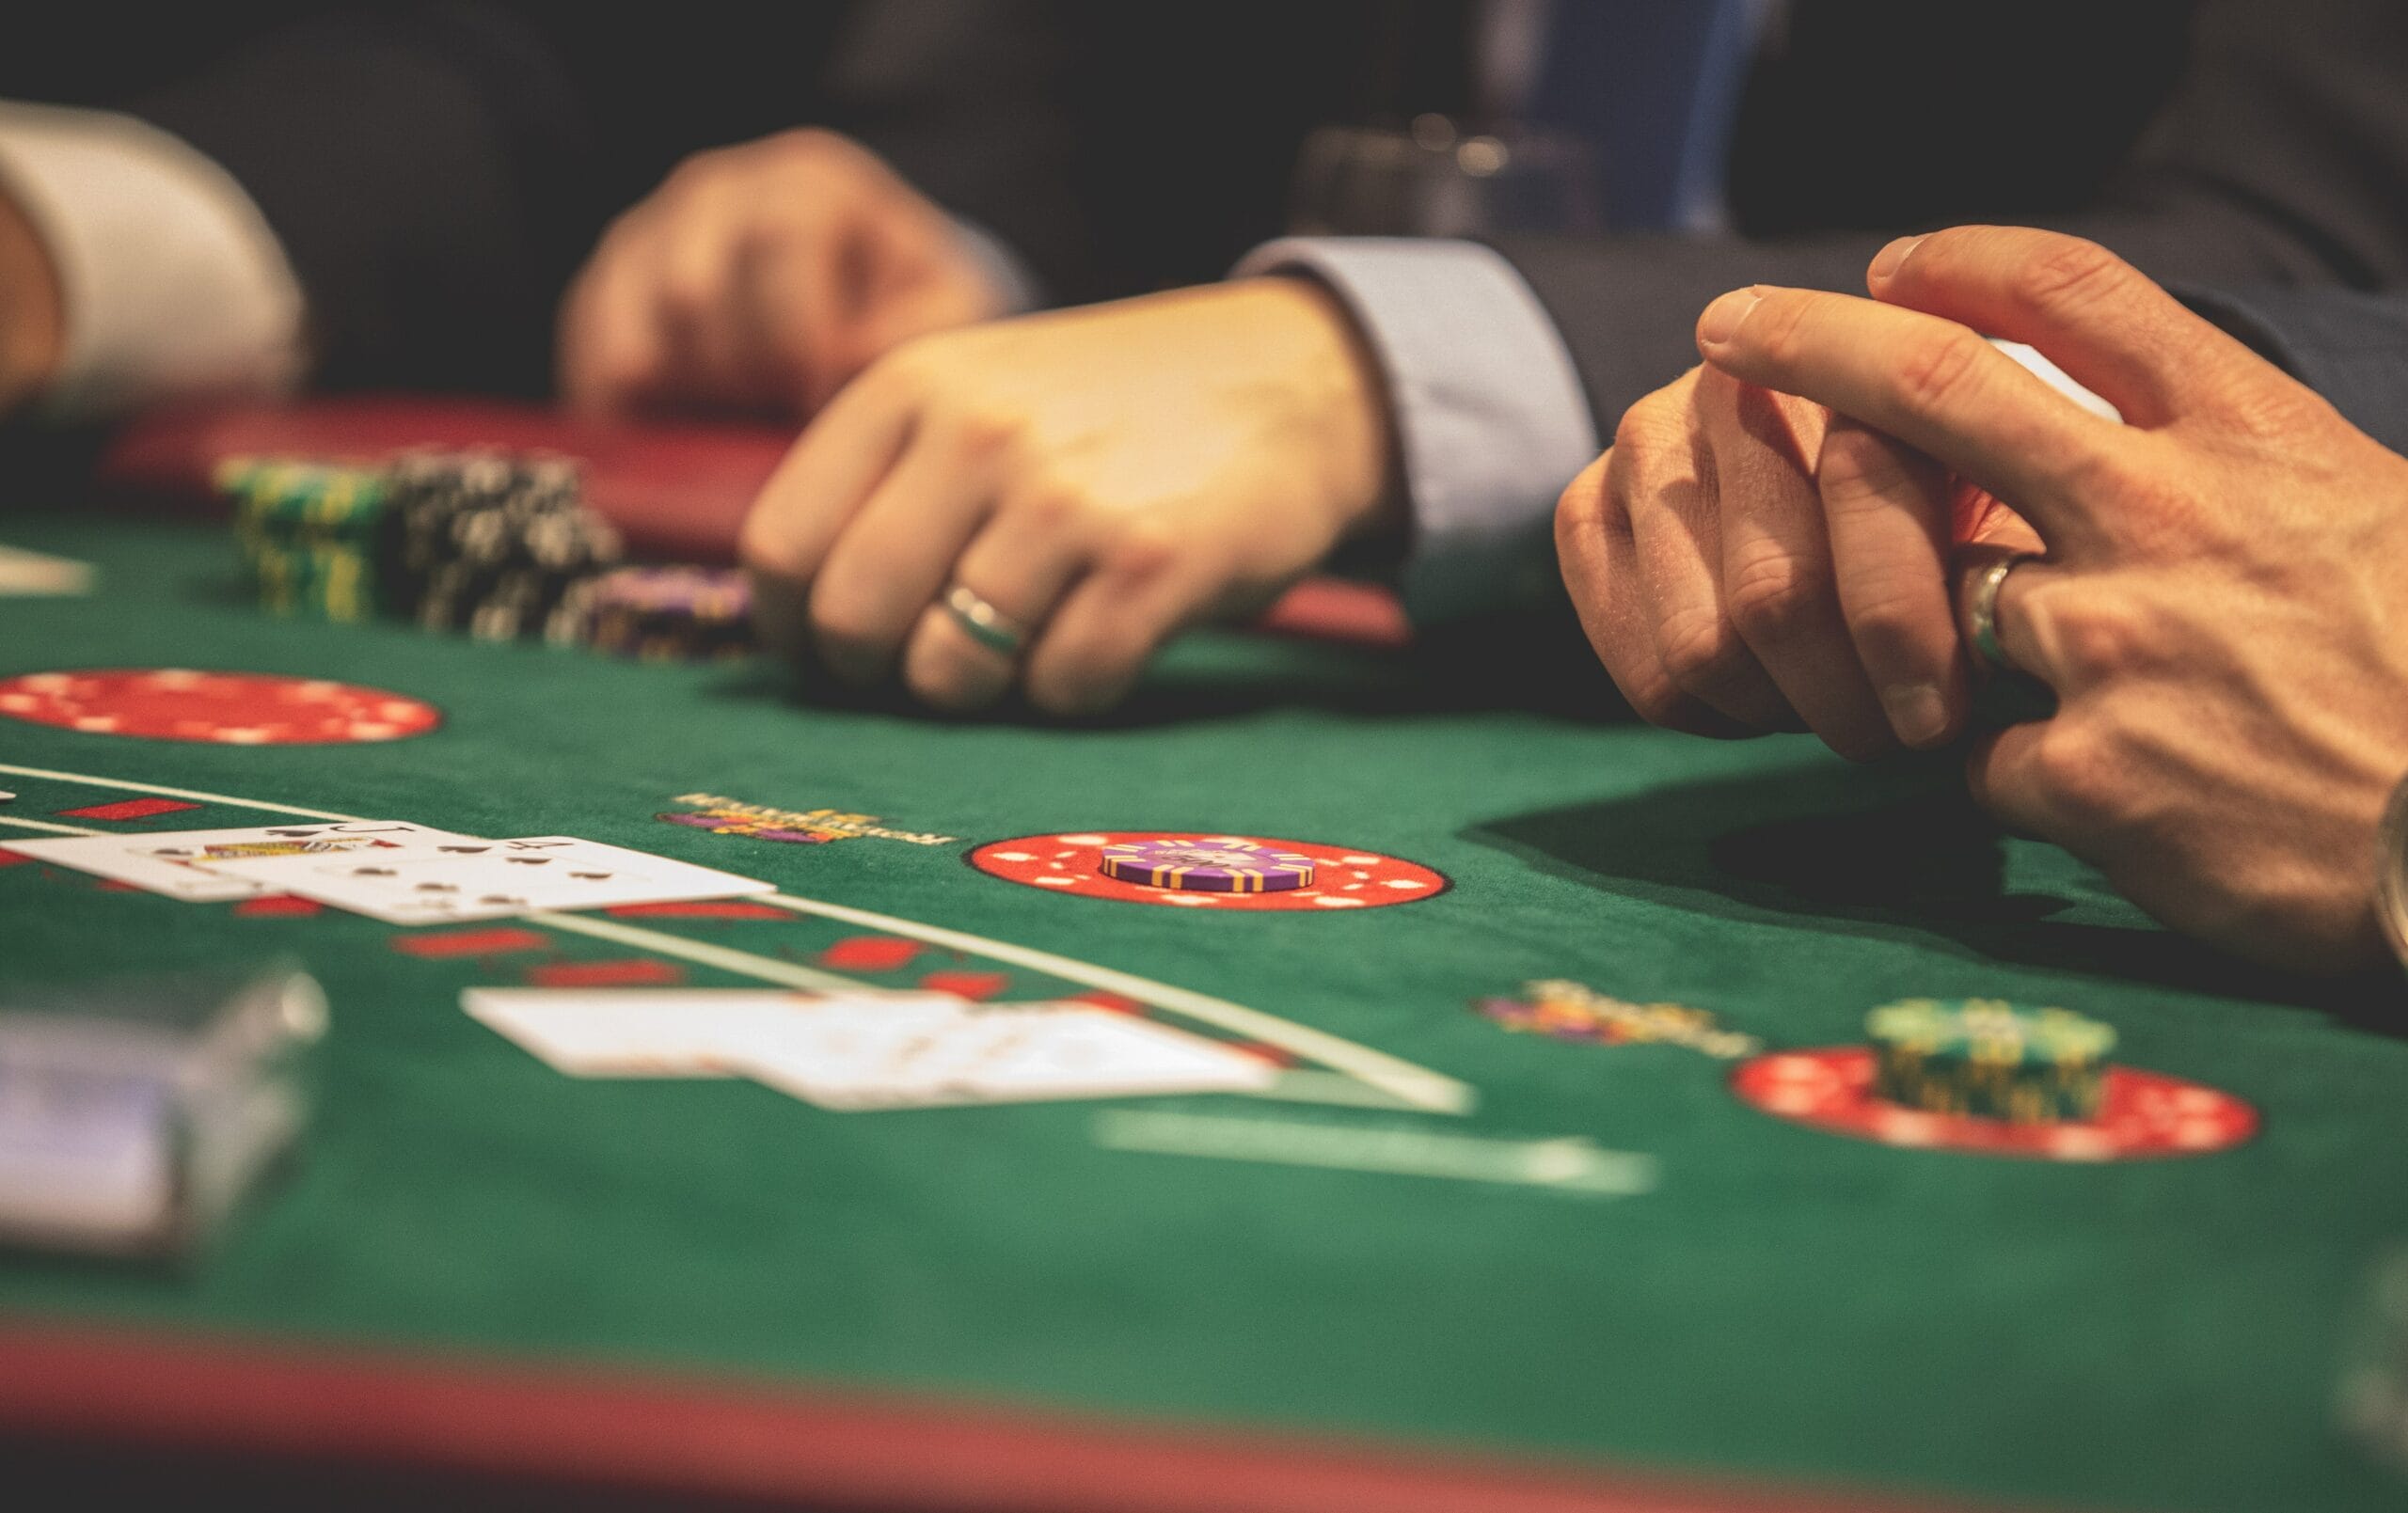  The Ultimate Guide to Finding the Best Online Casino in India